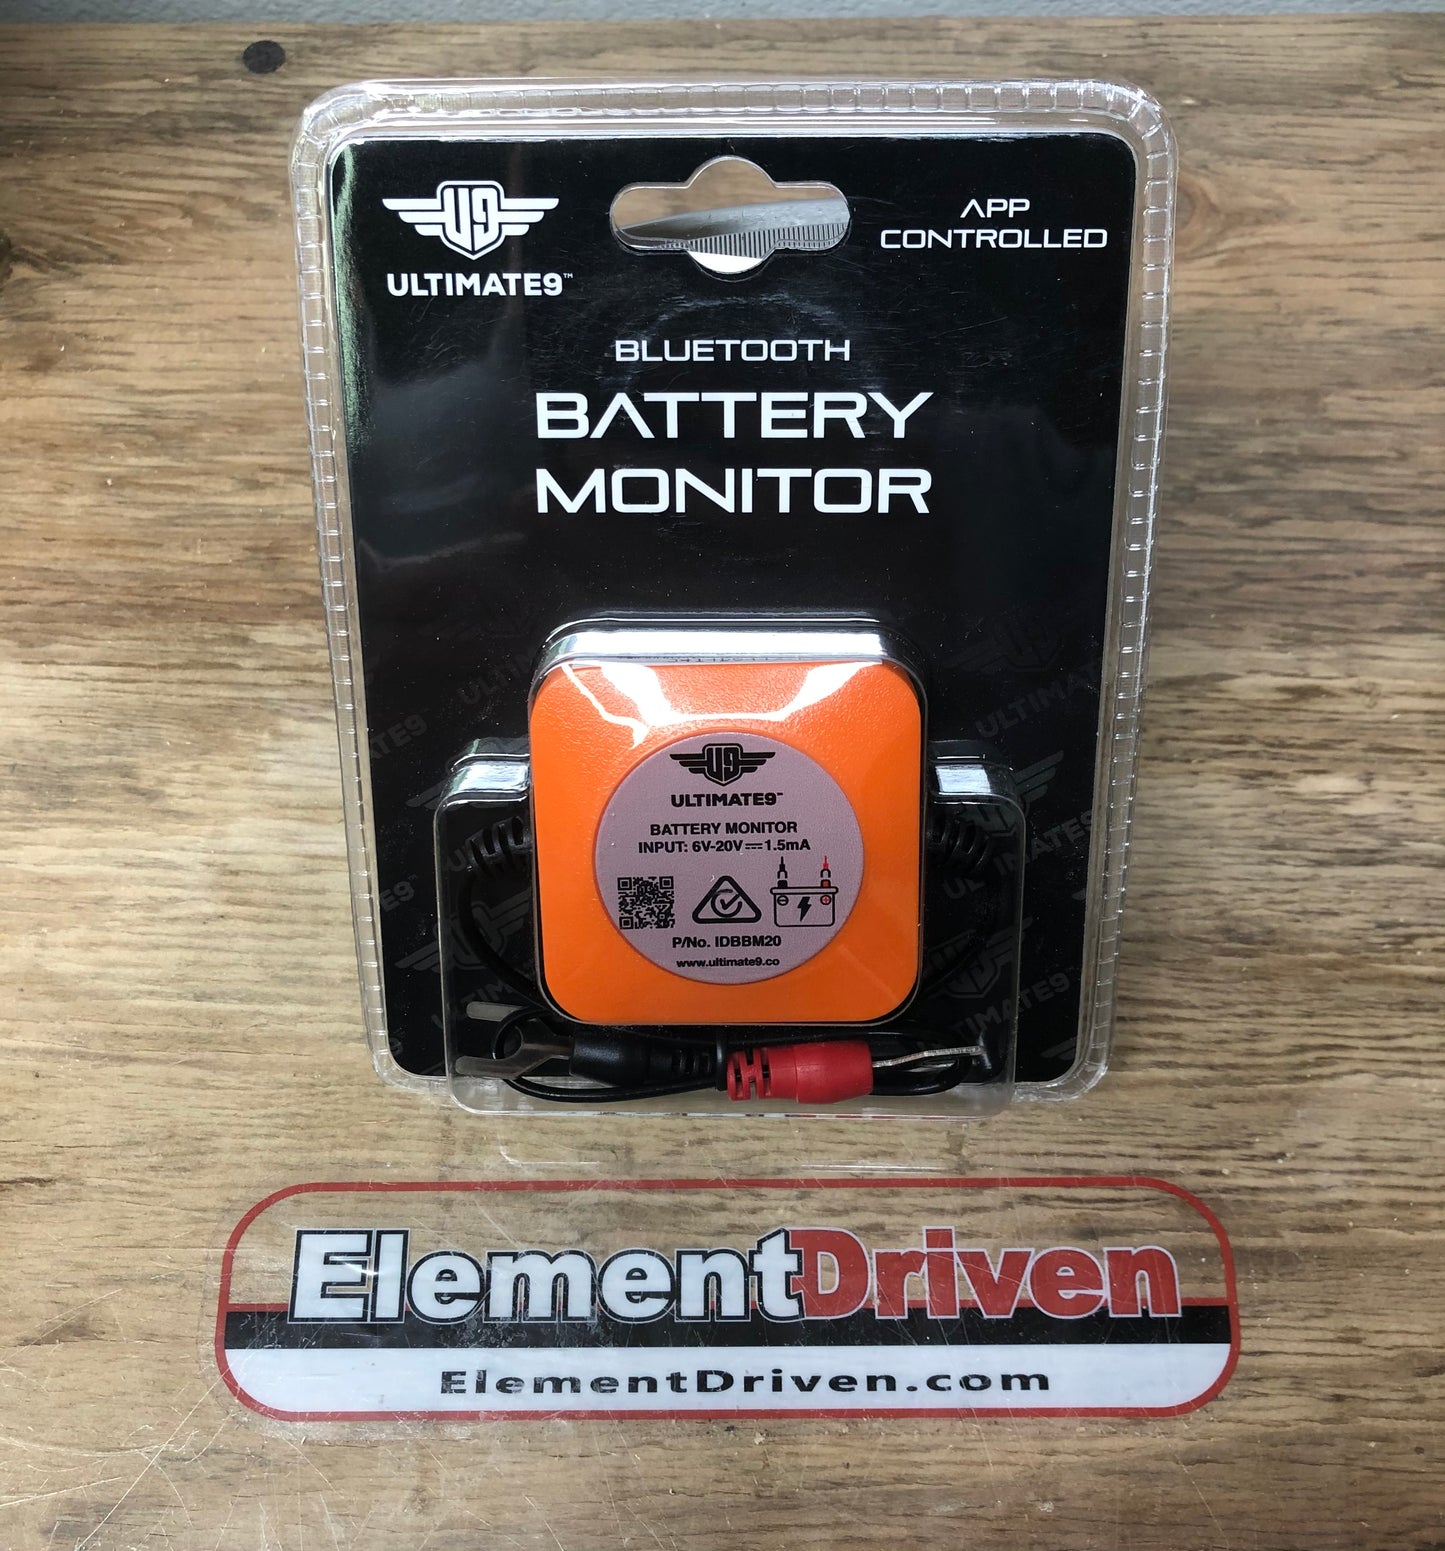 Bluetooth Battery Monitor by Ultimate9